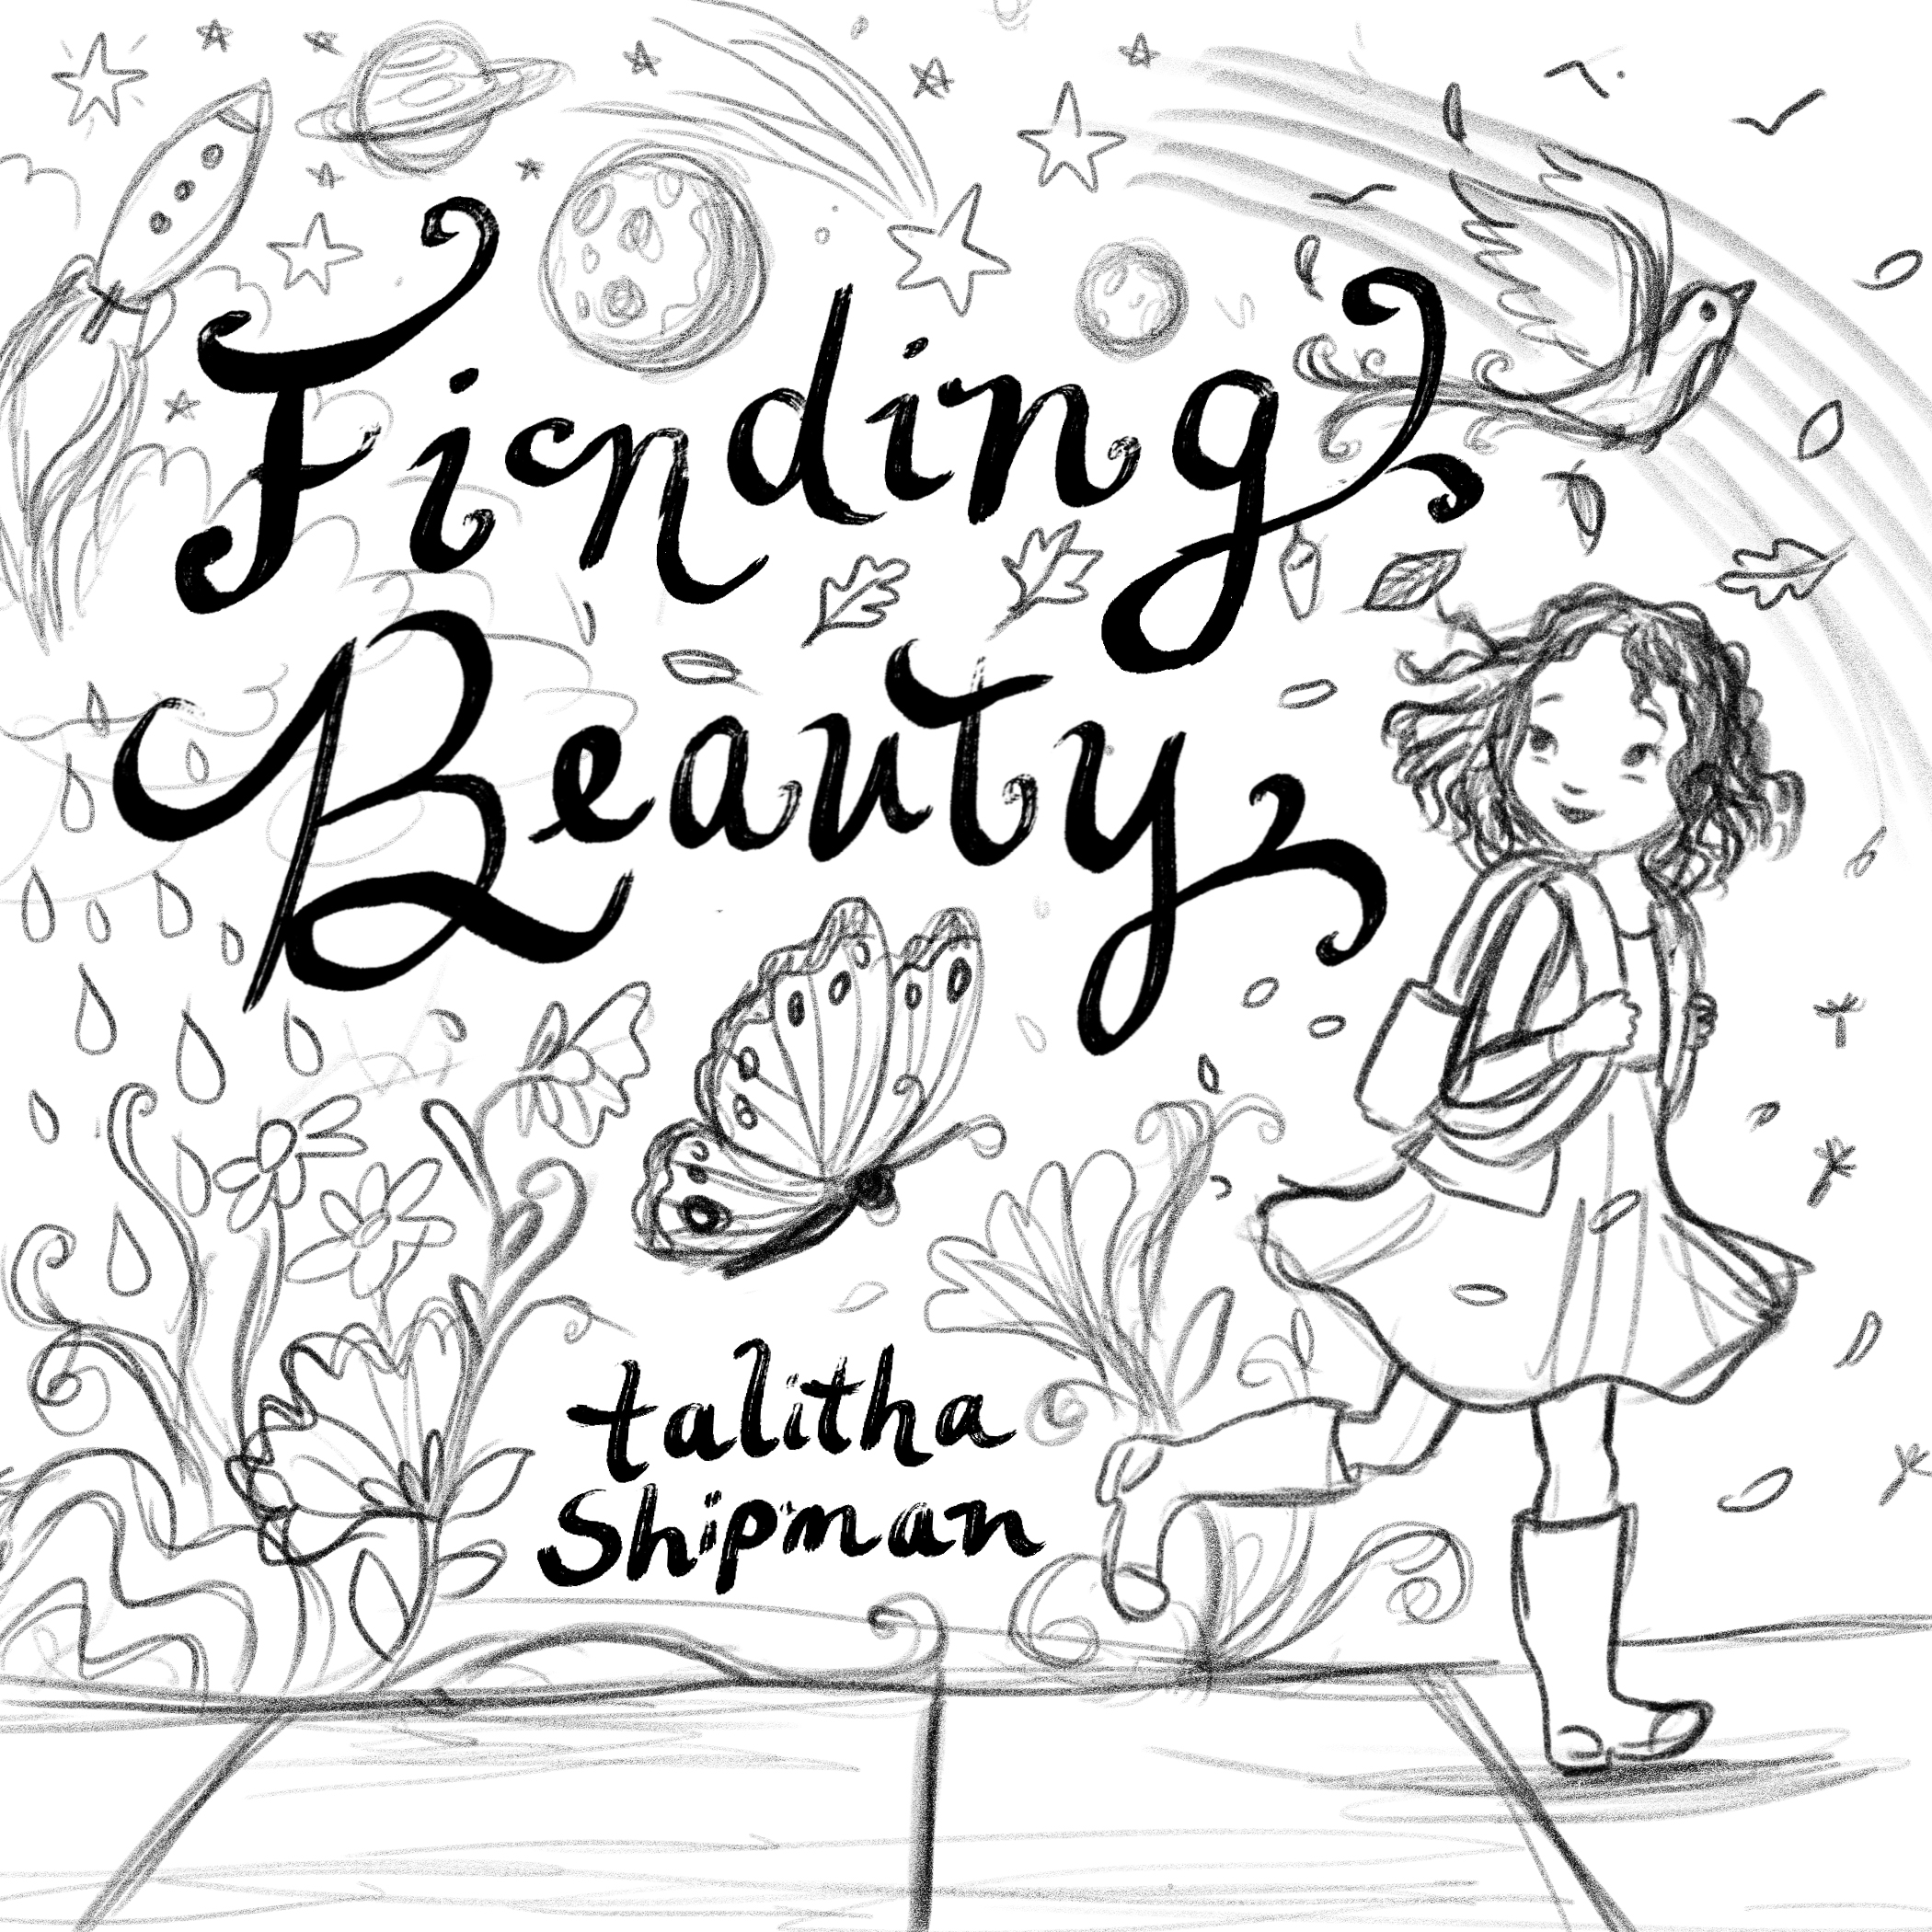 celebrate-picture-books-picture-book-review-Finding-Beauty-cover-sketch-walking-2